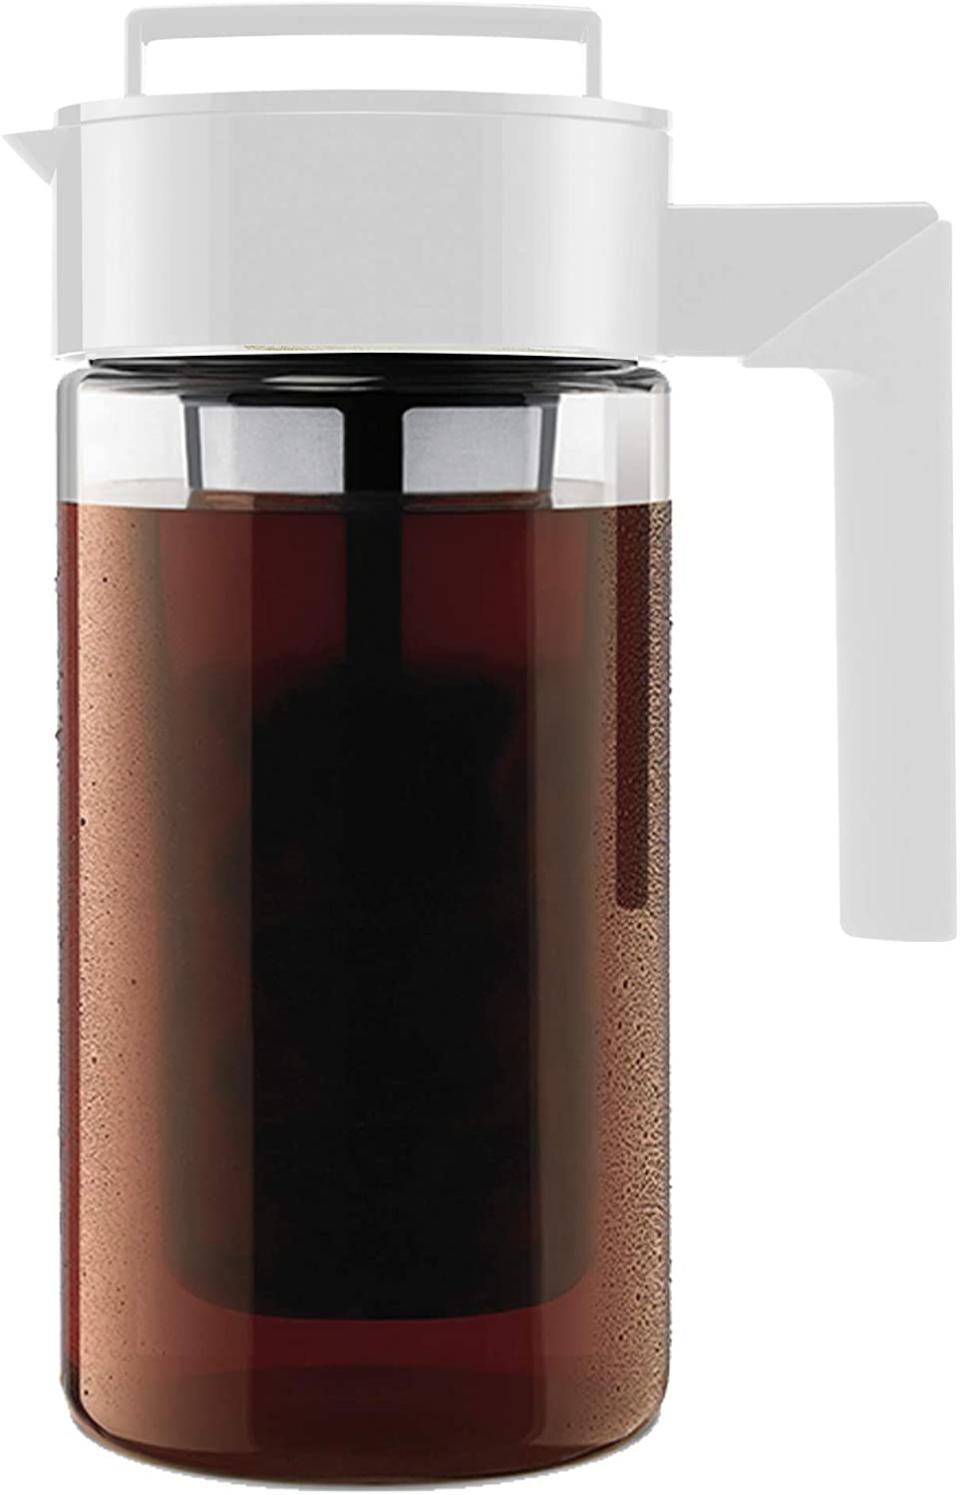 iced coffee makers, Takeya Patented Deluxe Cold Brew Coffee Maker